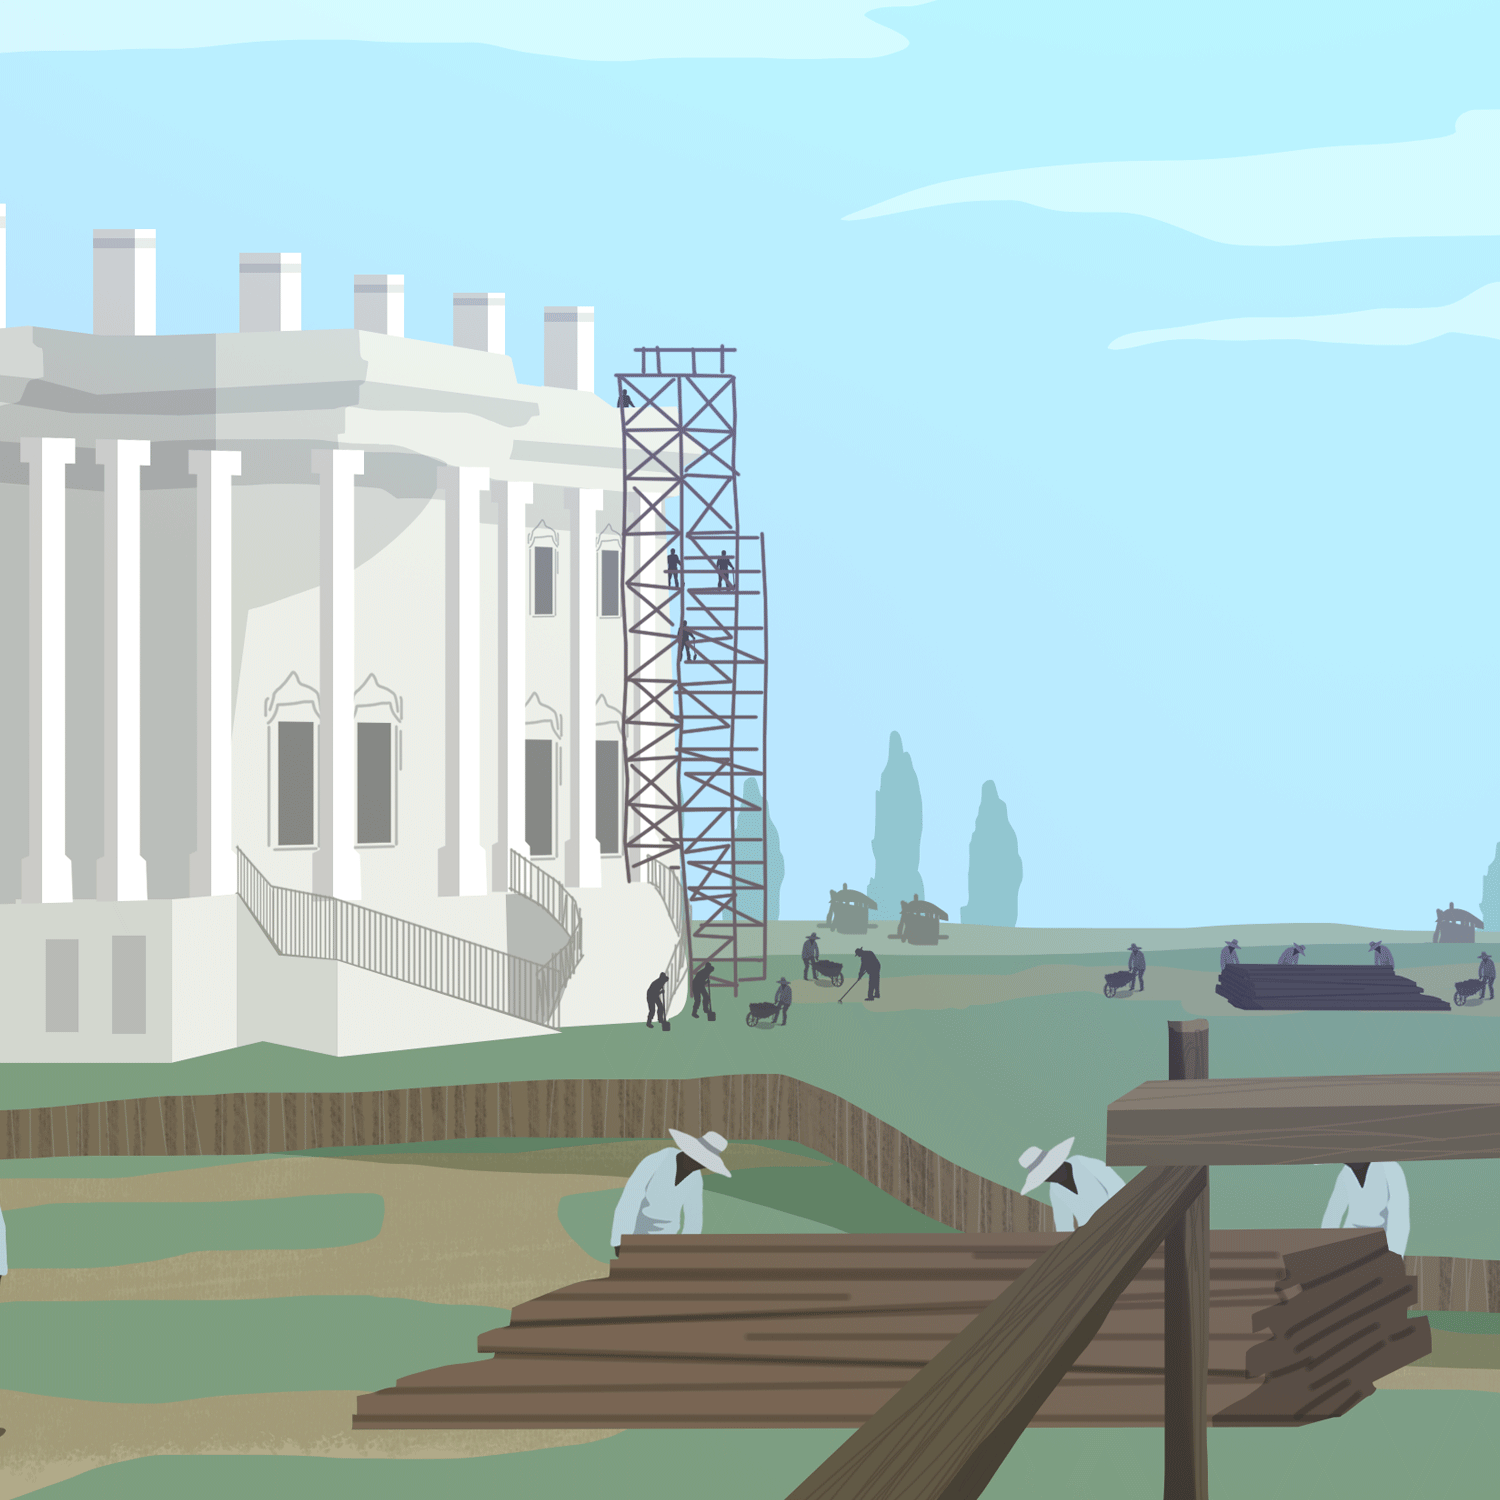 Who Built the White House?